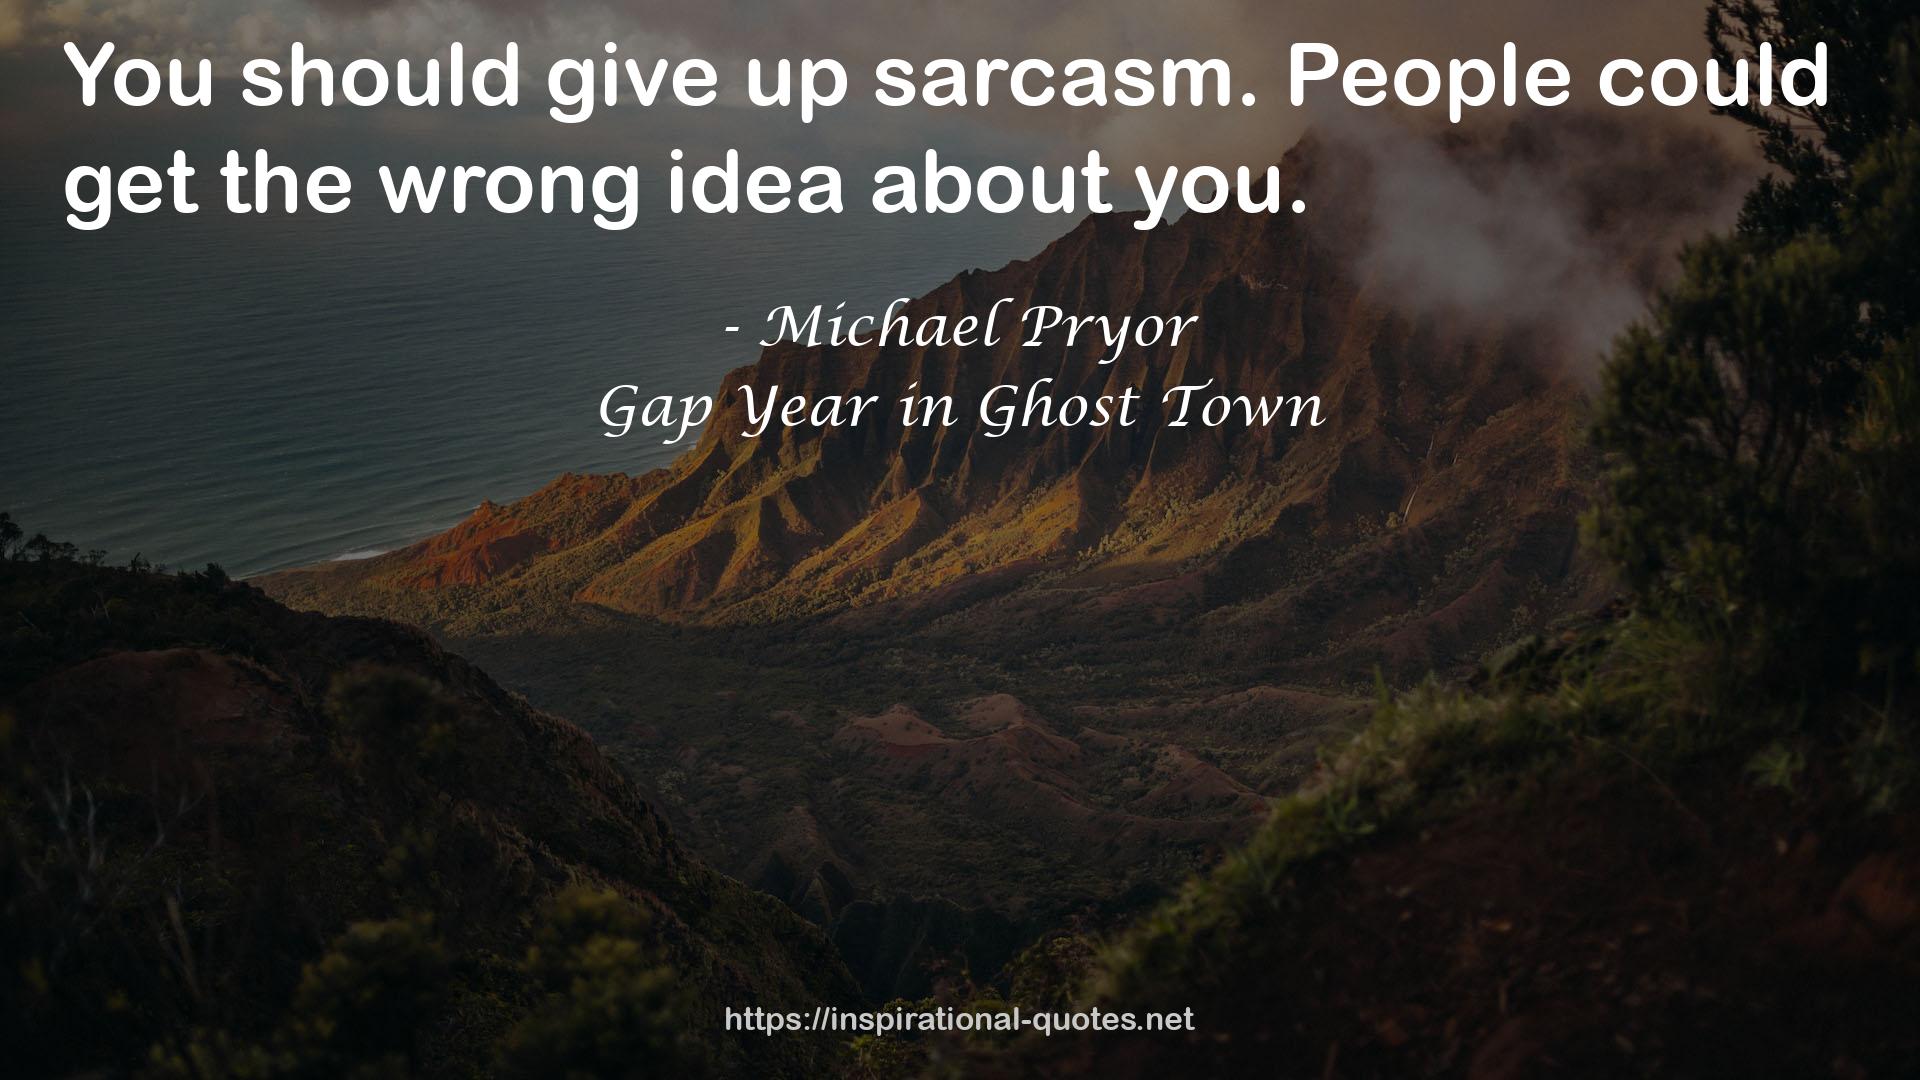 Gap Year in Ghost Town QUOTES